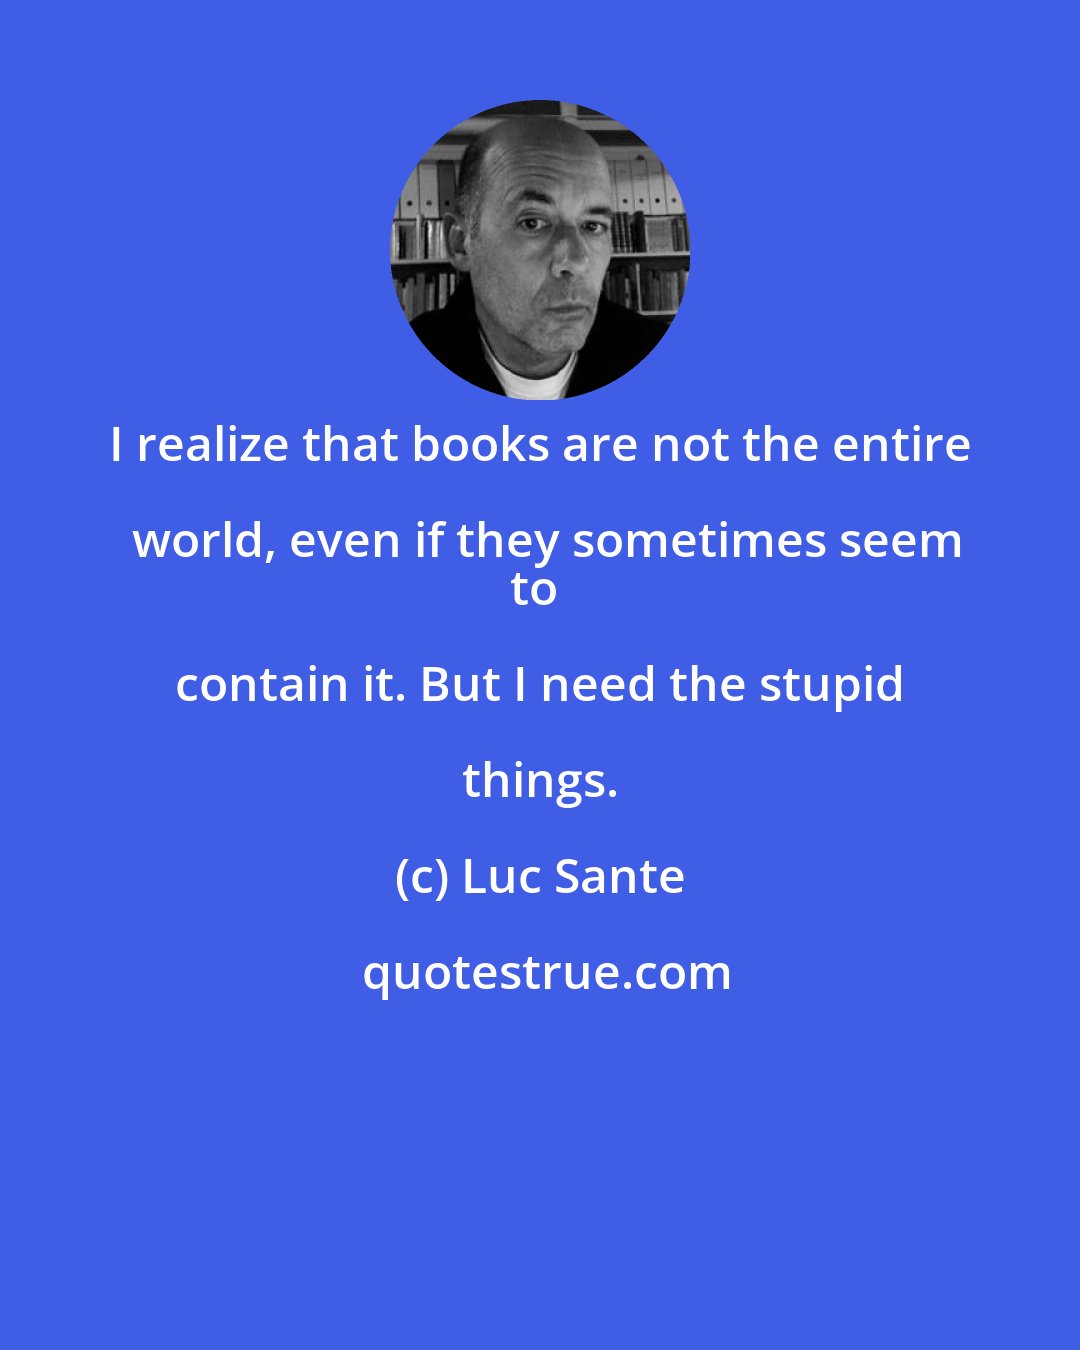 Luc Sante: I realize that books are not the entire world, even if they sometimes seem
to contain it. But I need the stupid things.